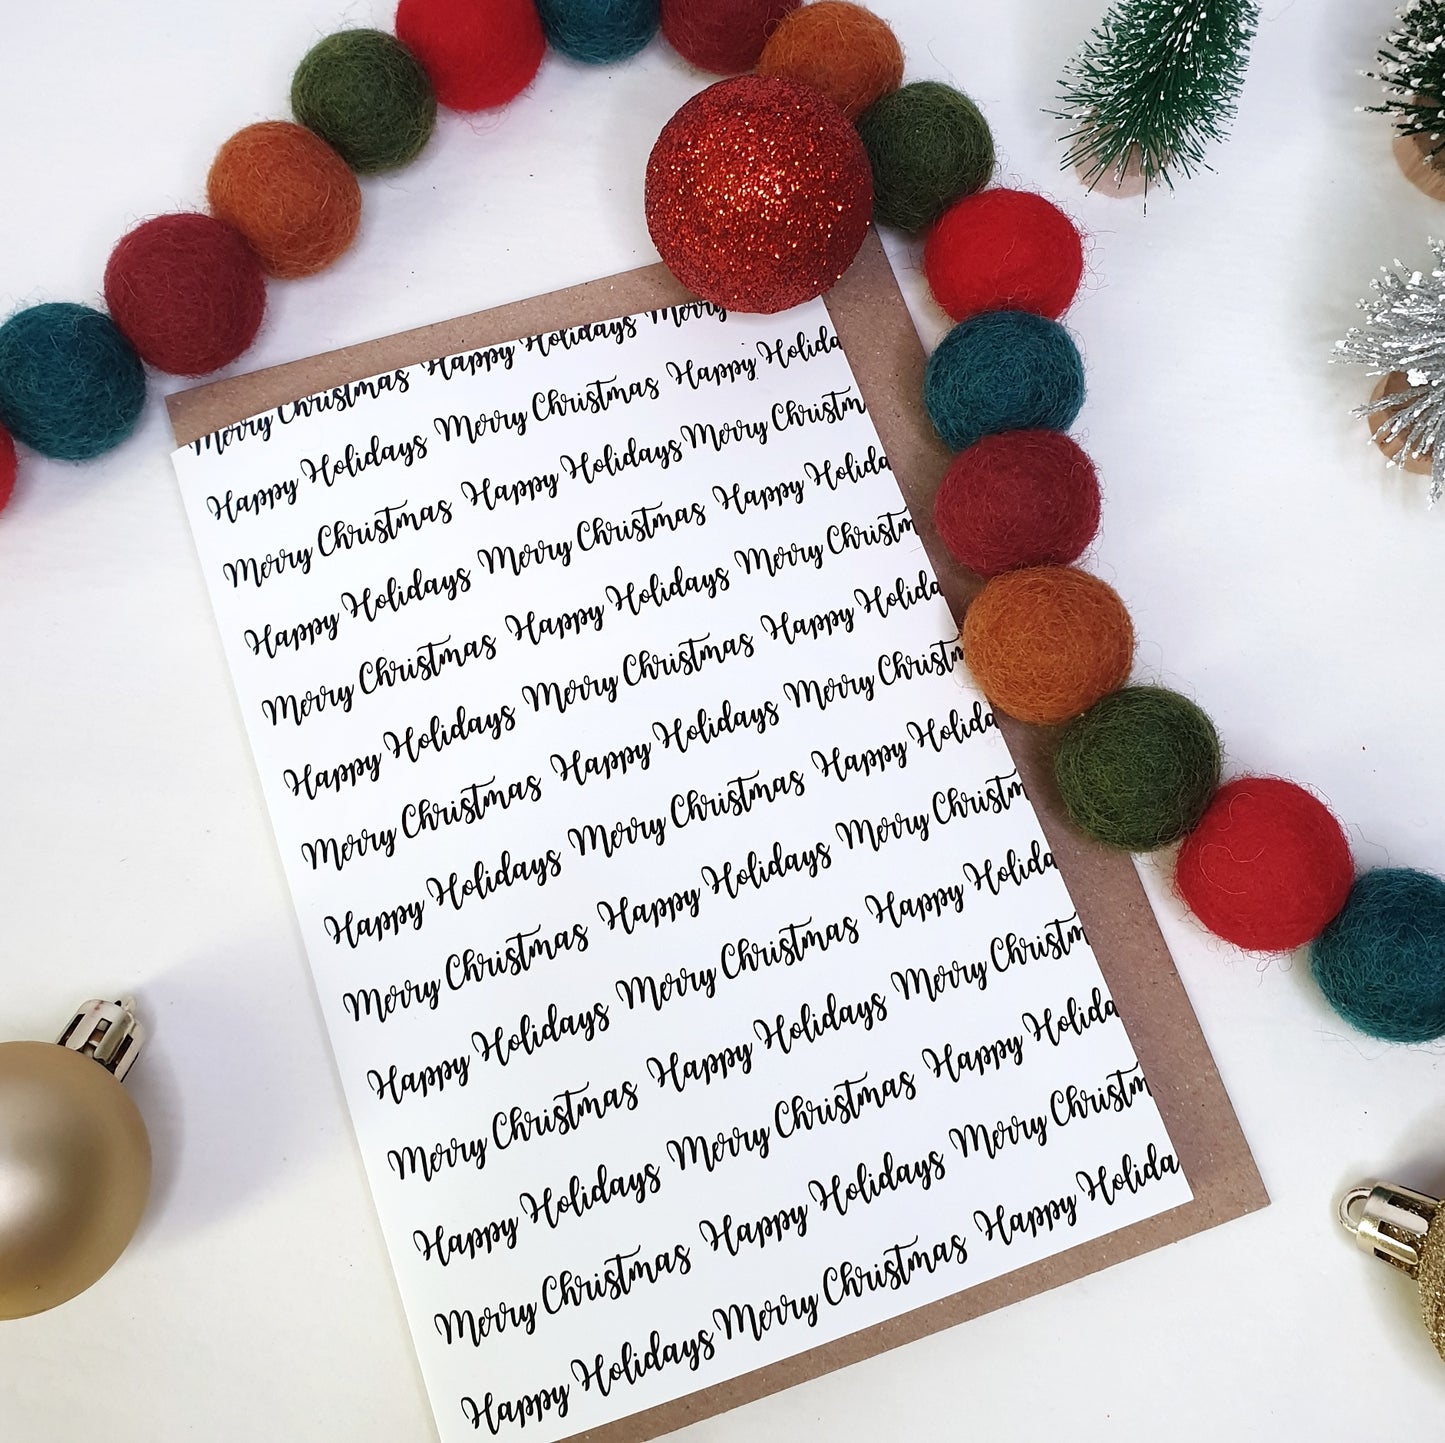 Merry Christmas Happy Holidays - A6 Monochrome Typo Greeting Card